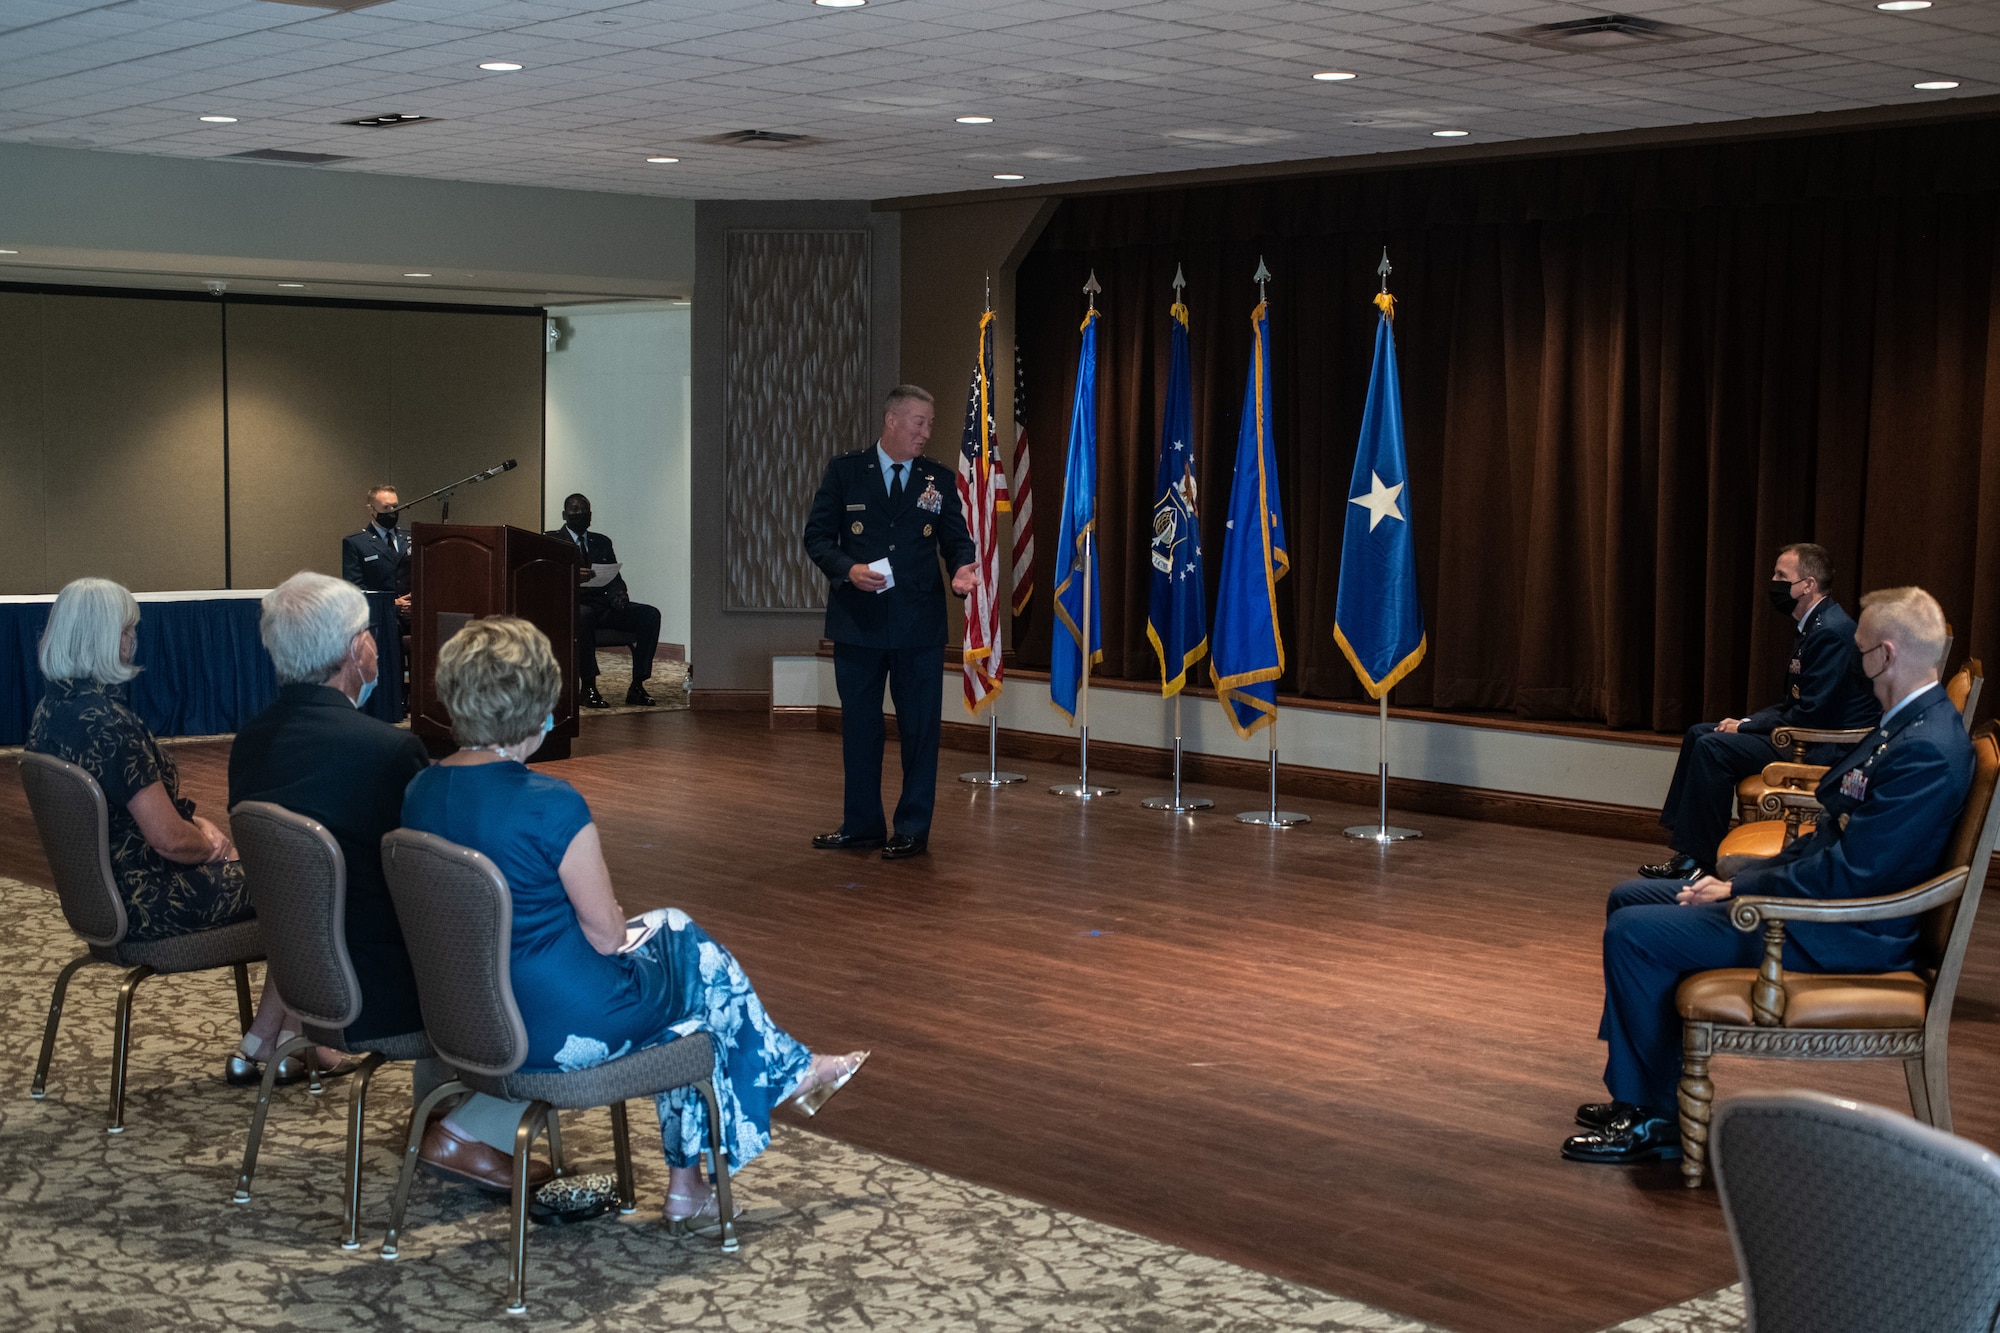 Brig. Gen. Brian Bruckbauer, Air Force Security Assistance and Cooperation Directorate Director, speaks during the AFSAC Change of Leadership Ceremony at the Wright-Patterson Club, August 13, 2021. The ceremony is a symbol of leadership being exchanged from one director to the next. Brig. Gen. Luke Cropsey assumed leadership of AFSAC from Bruckbauer. (U.S. Air Force photo by Tech. Sgt. Matthew B. Fredericks)